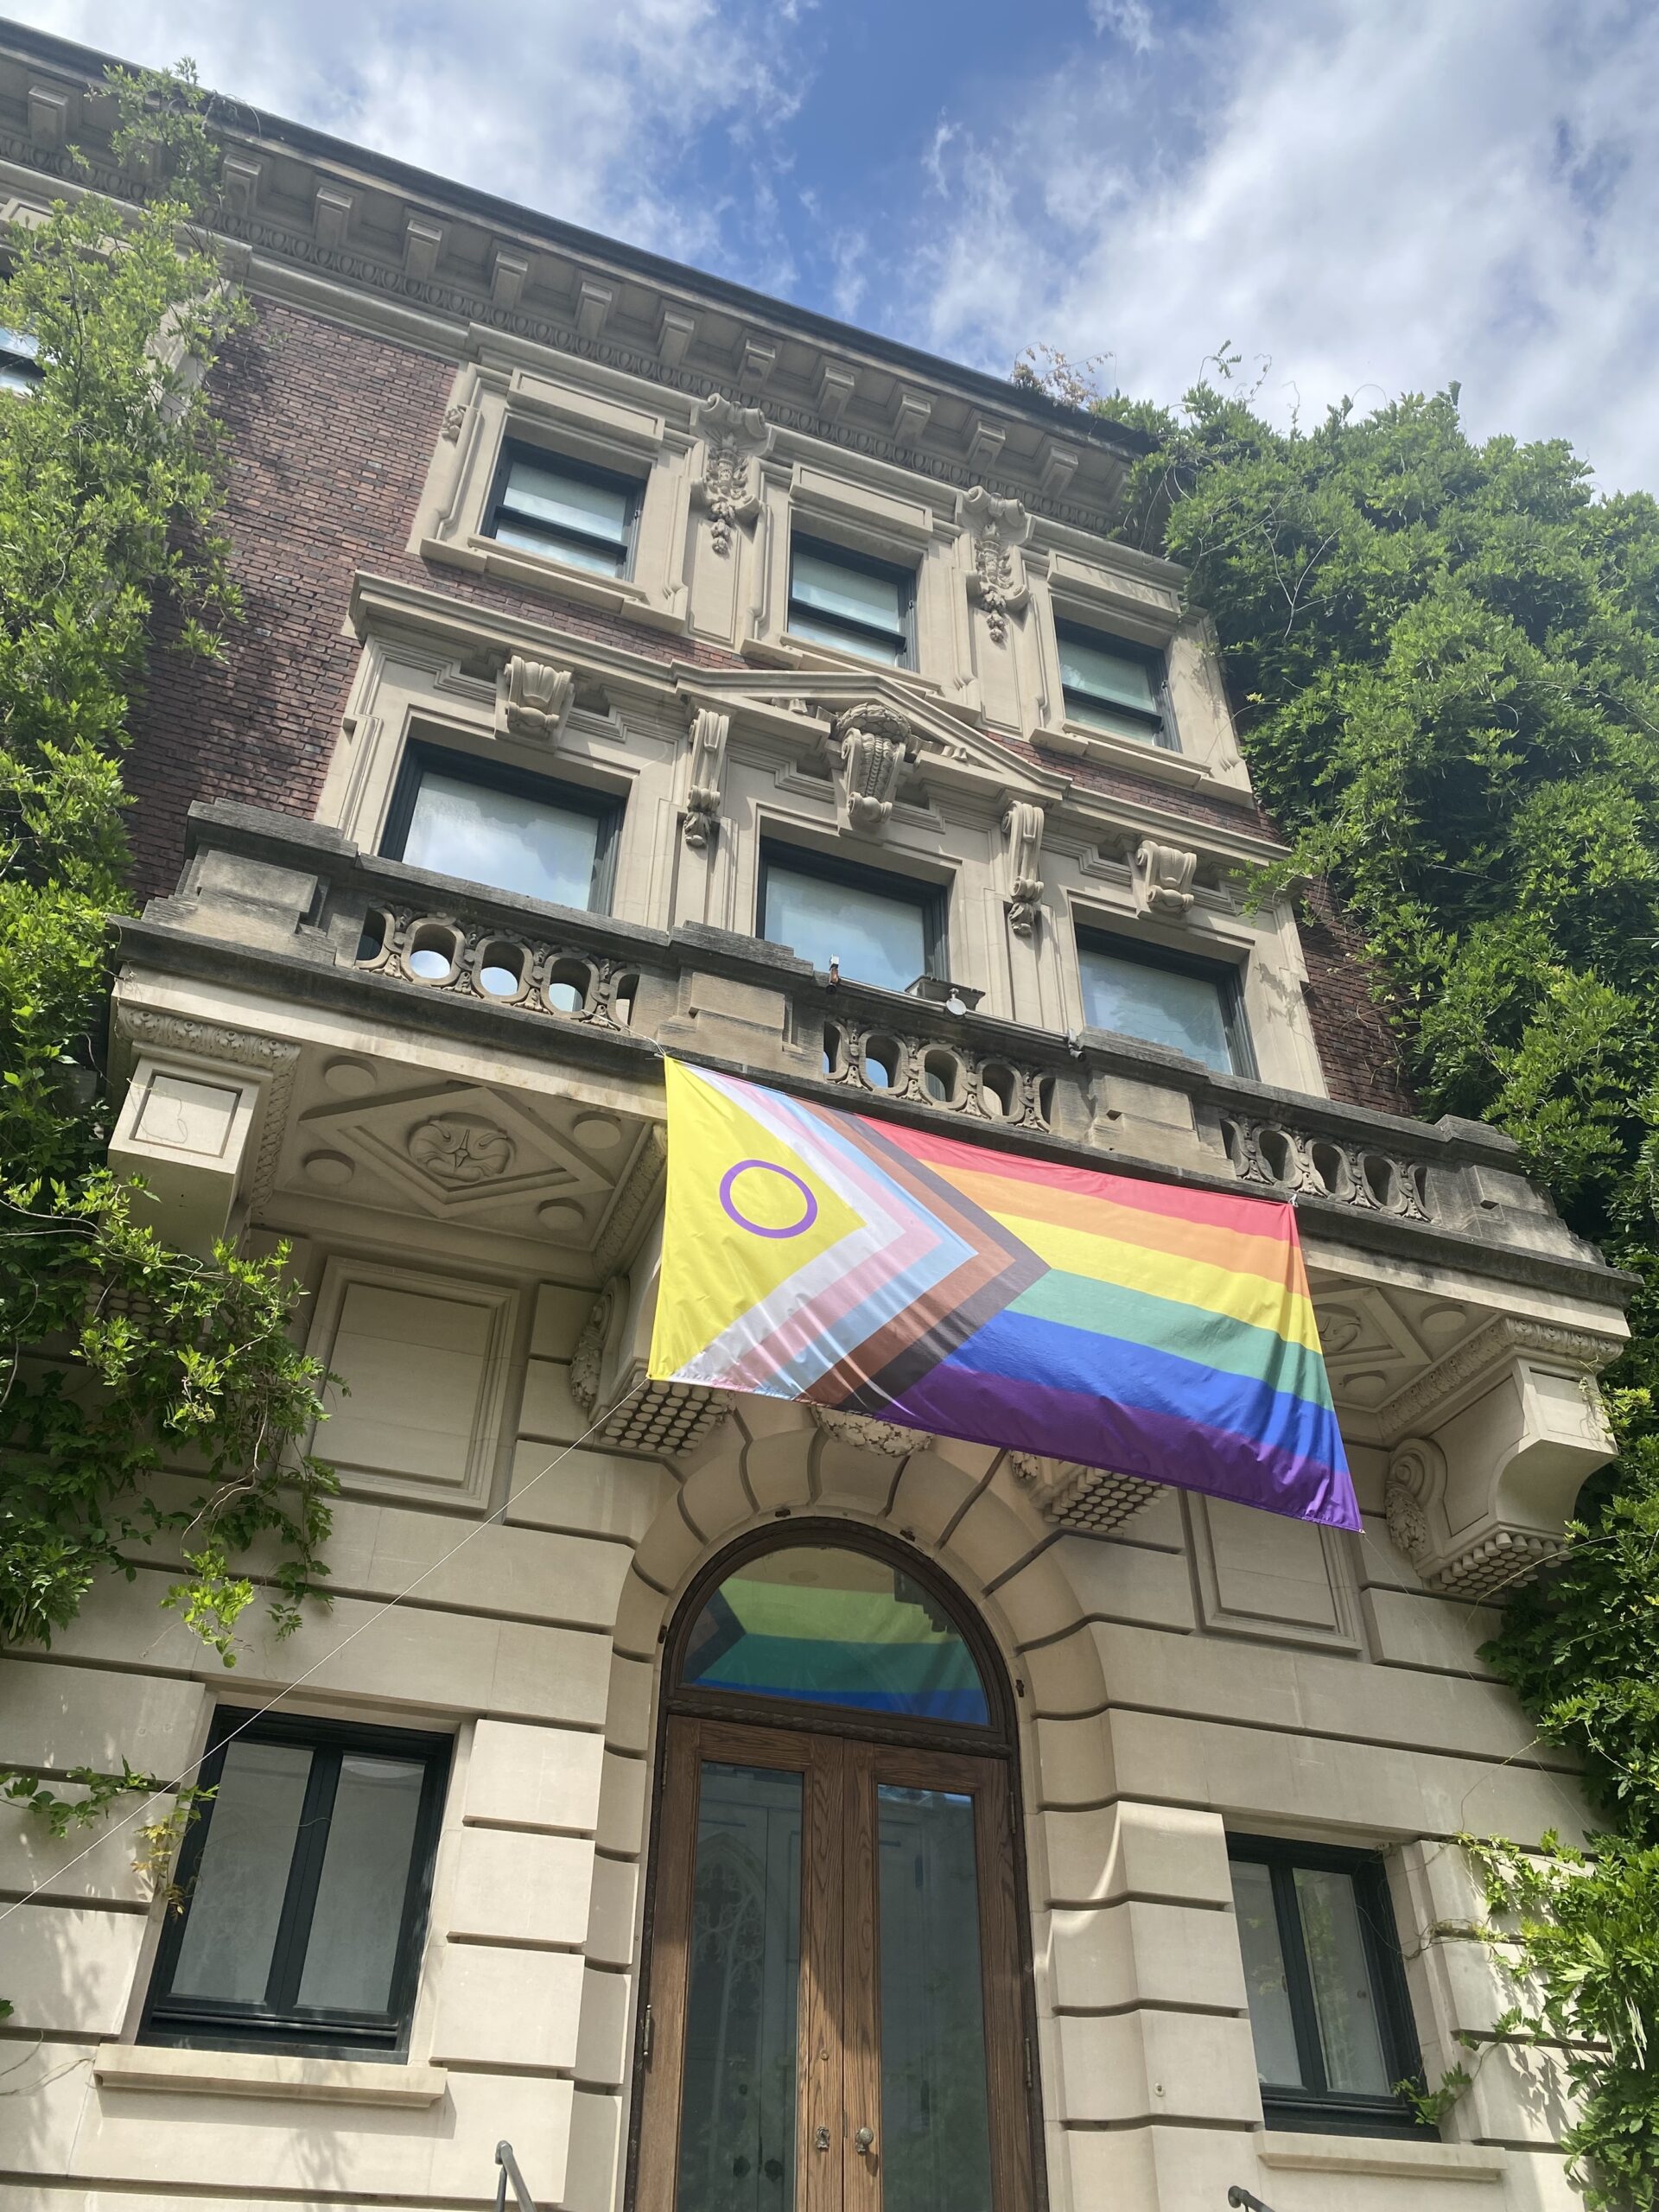 Close-up view of the Pride flag, of many stripes and colors, hanging from the balcony of an ornate mansion with foliage covering it.